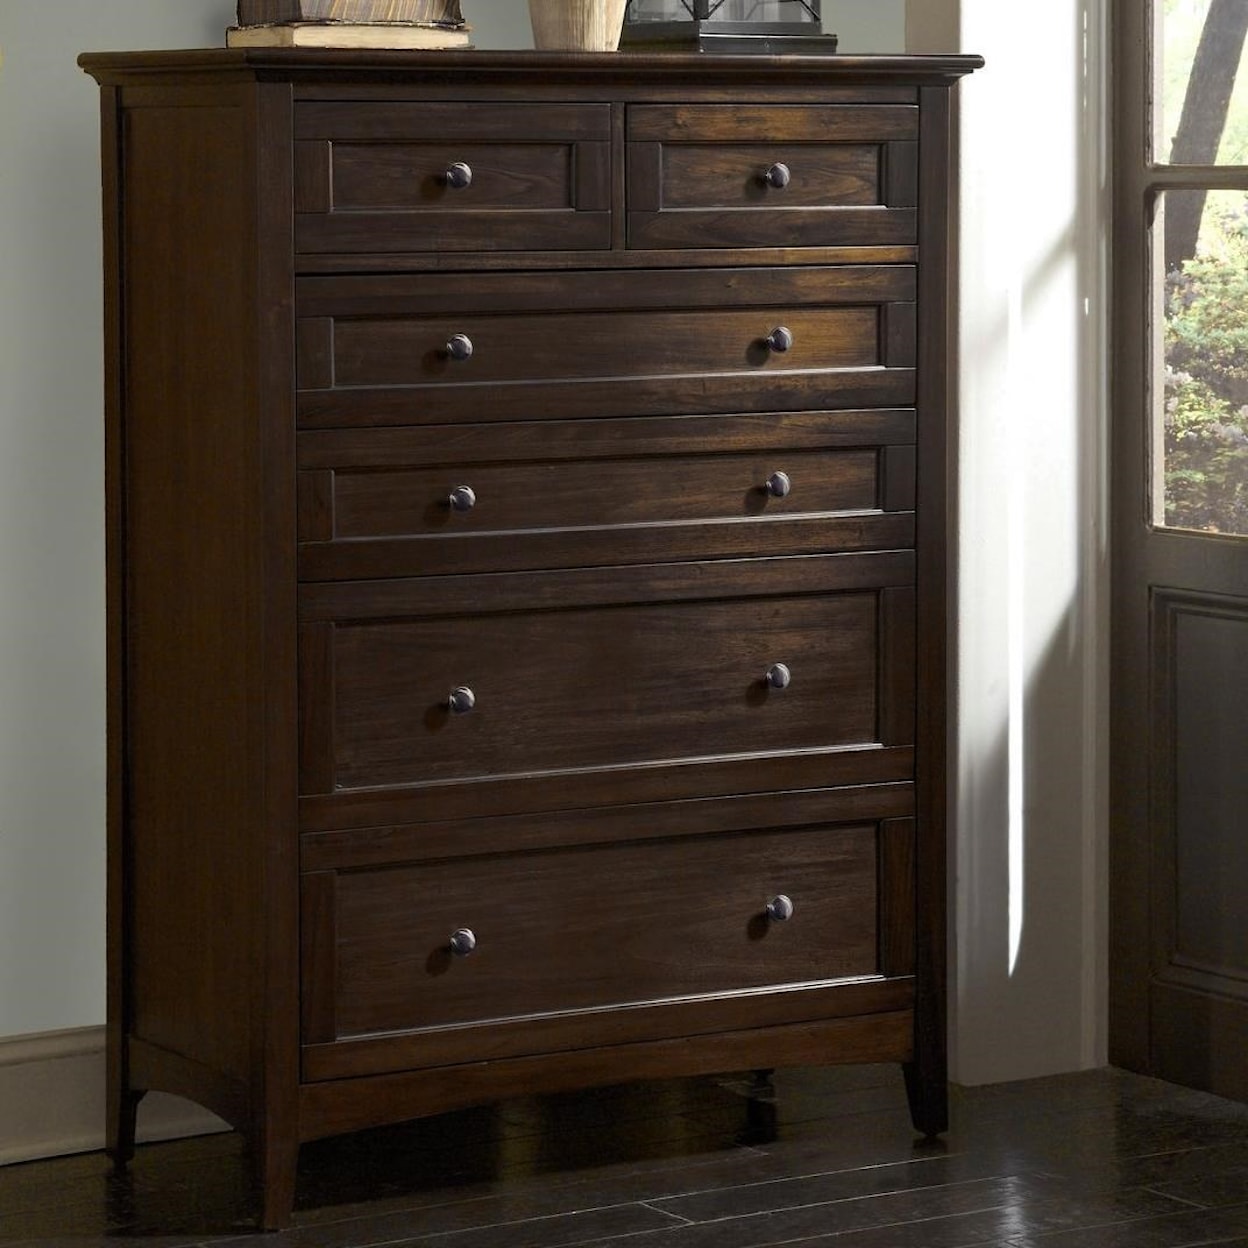 AAmerica Westlake Chest of Drawers